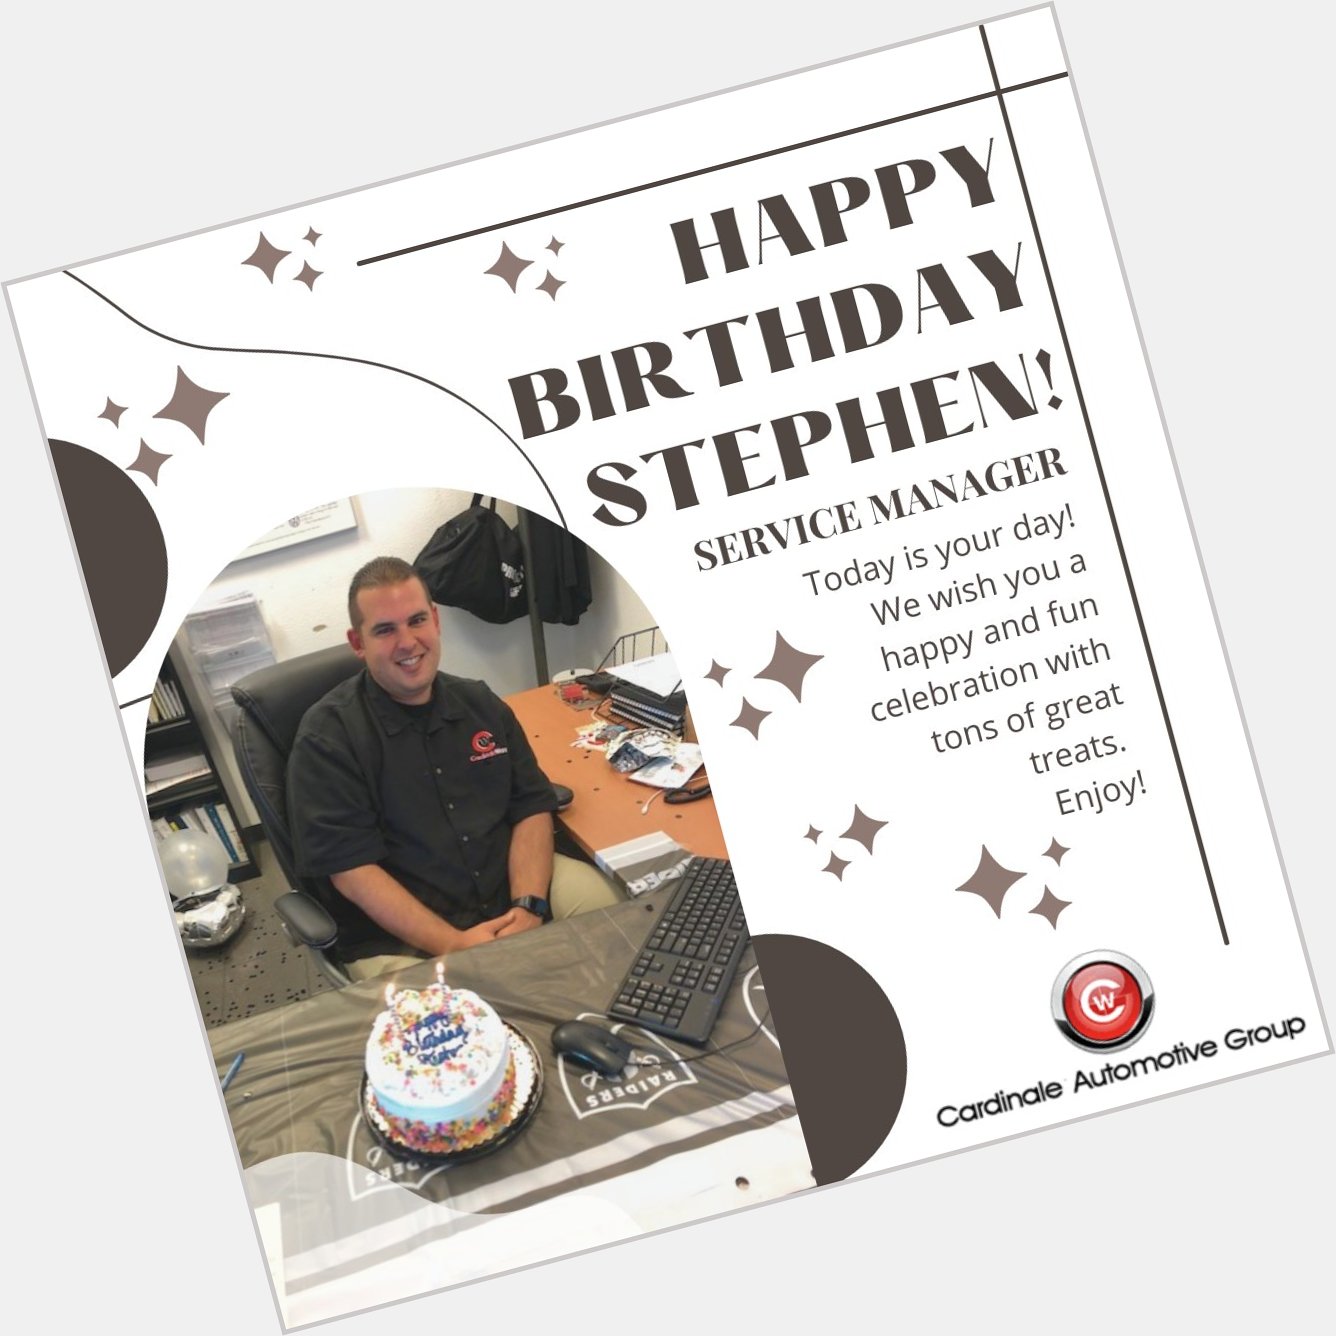 Happy Birthday Stephen! May all your birthday wishes come true! 